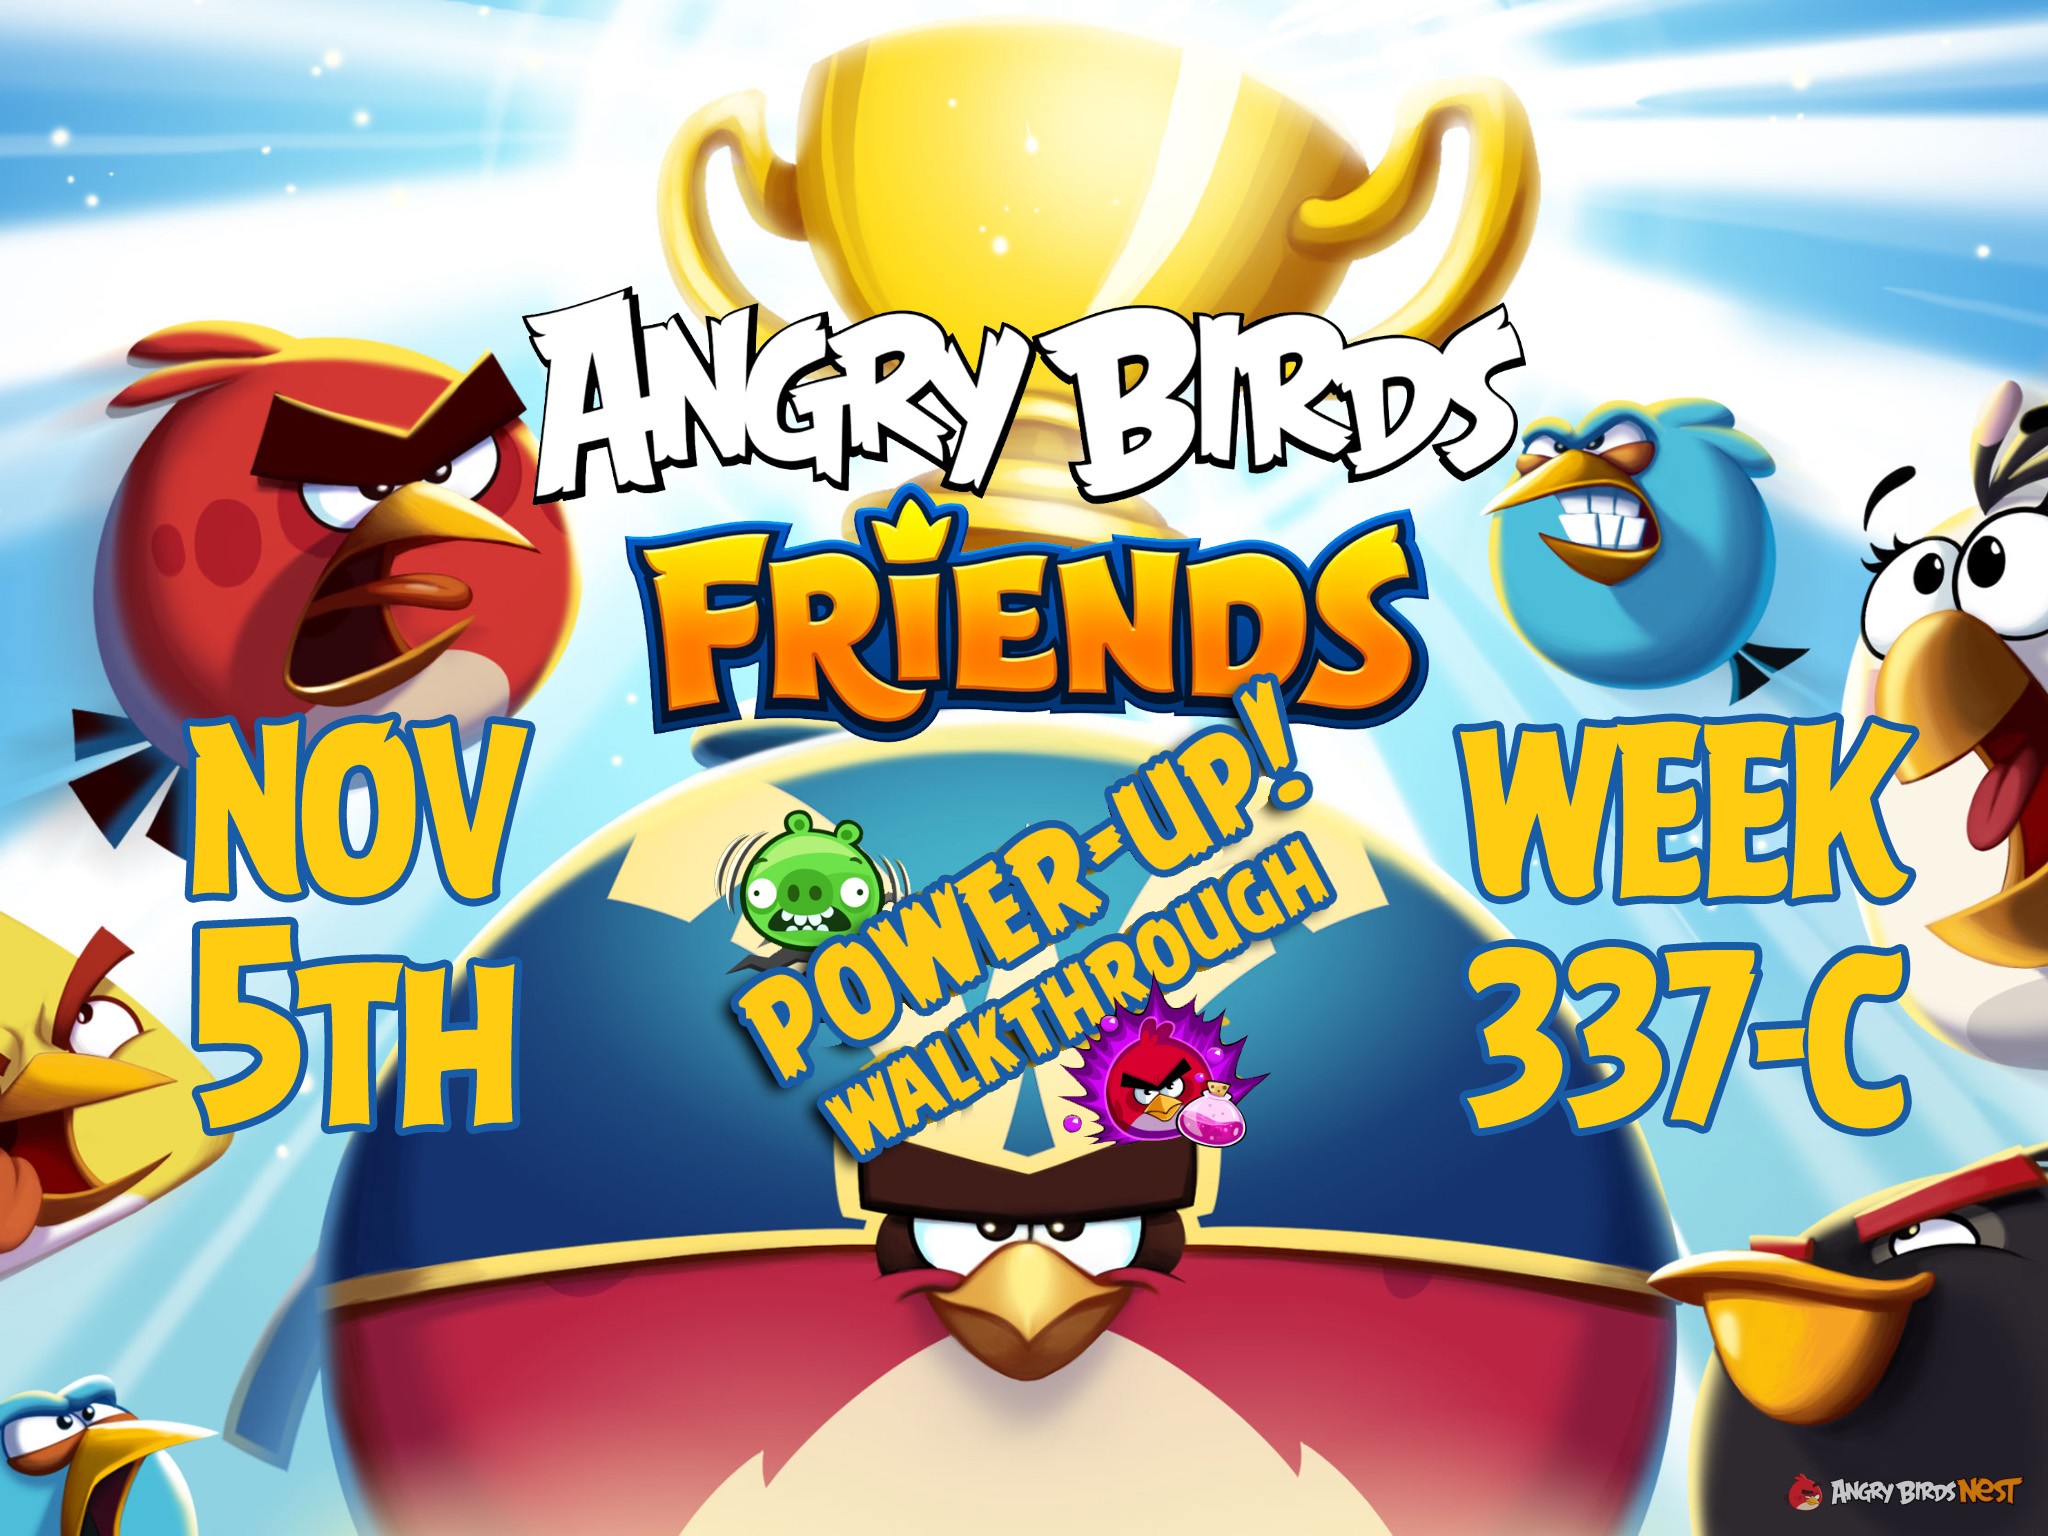 Angry-Birds-Friends-Tournament-Week-337-C-Feature-Image-PU